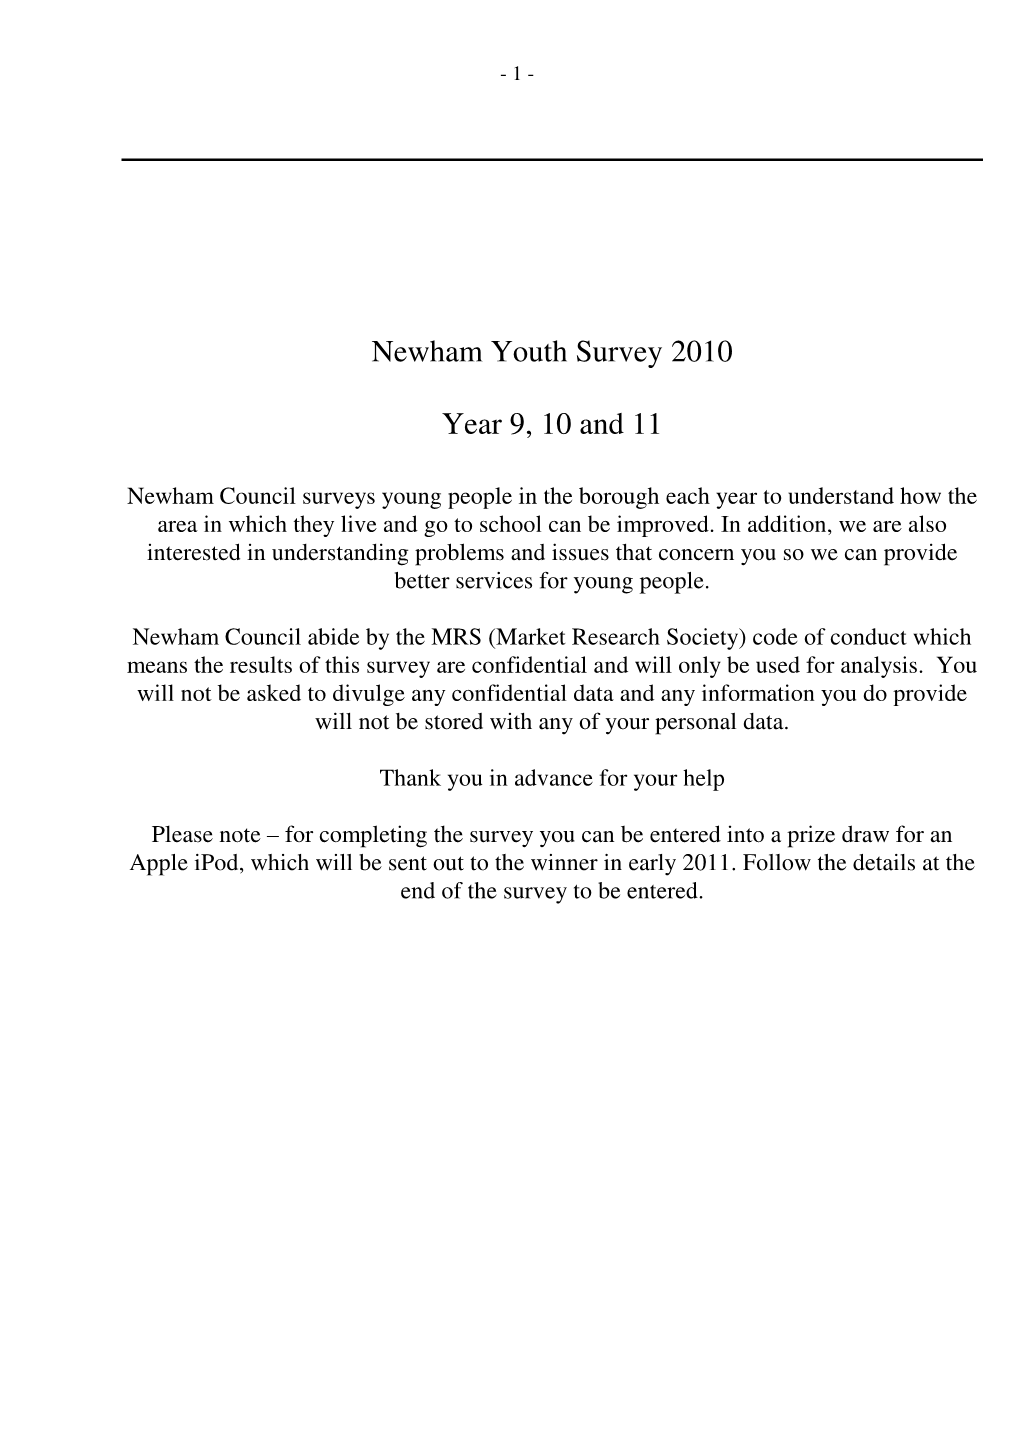 Newham Youth Survey 2010 Year 9, 10 and 11